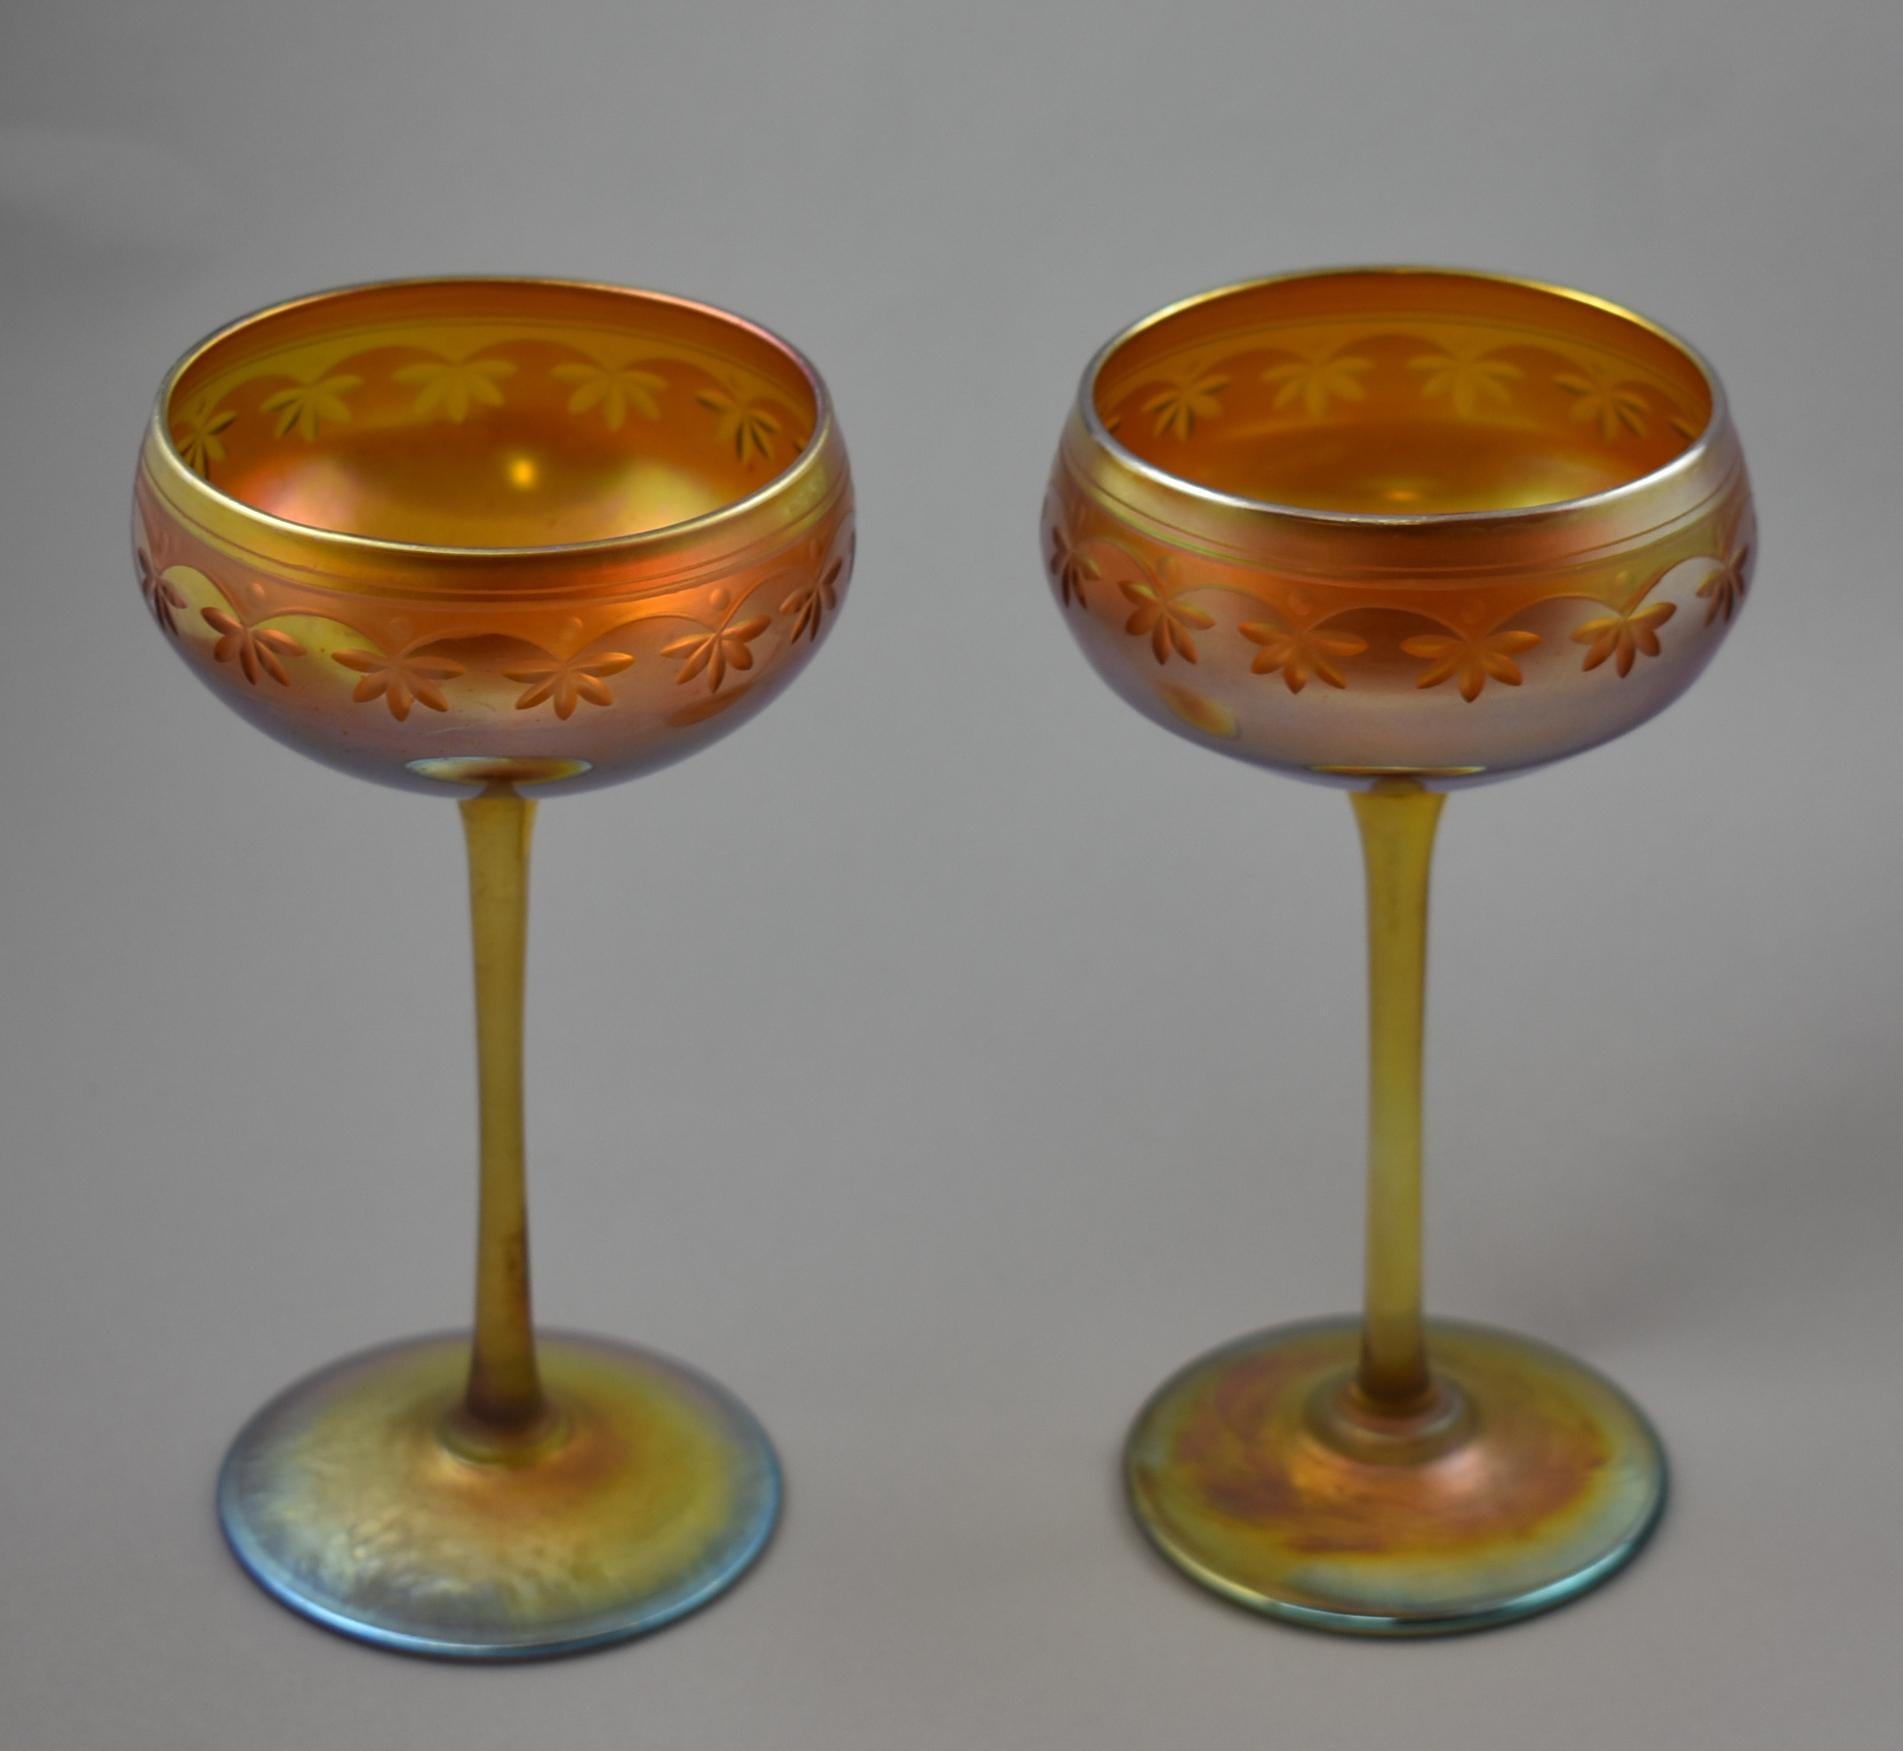 Pair of L.C. Tiffany favrile gold iridescent stemware with wheel cut details. Signed on the bottom. One glass is numbered 233.